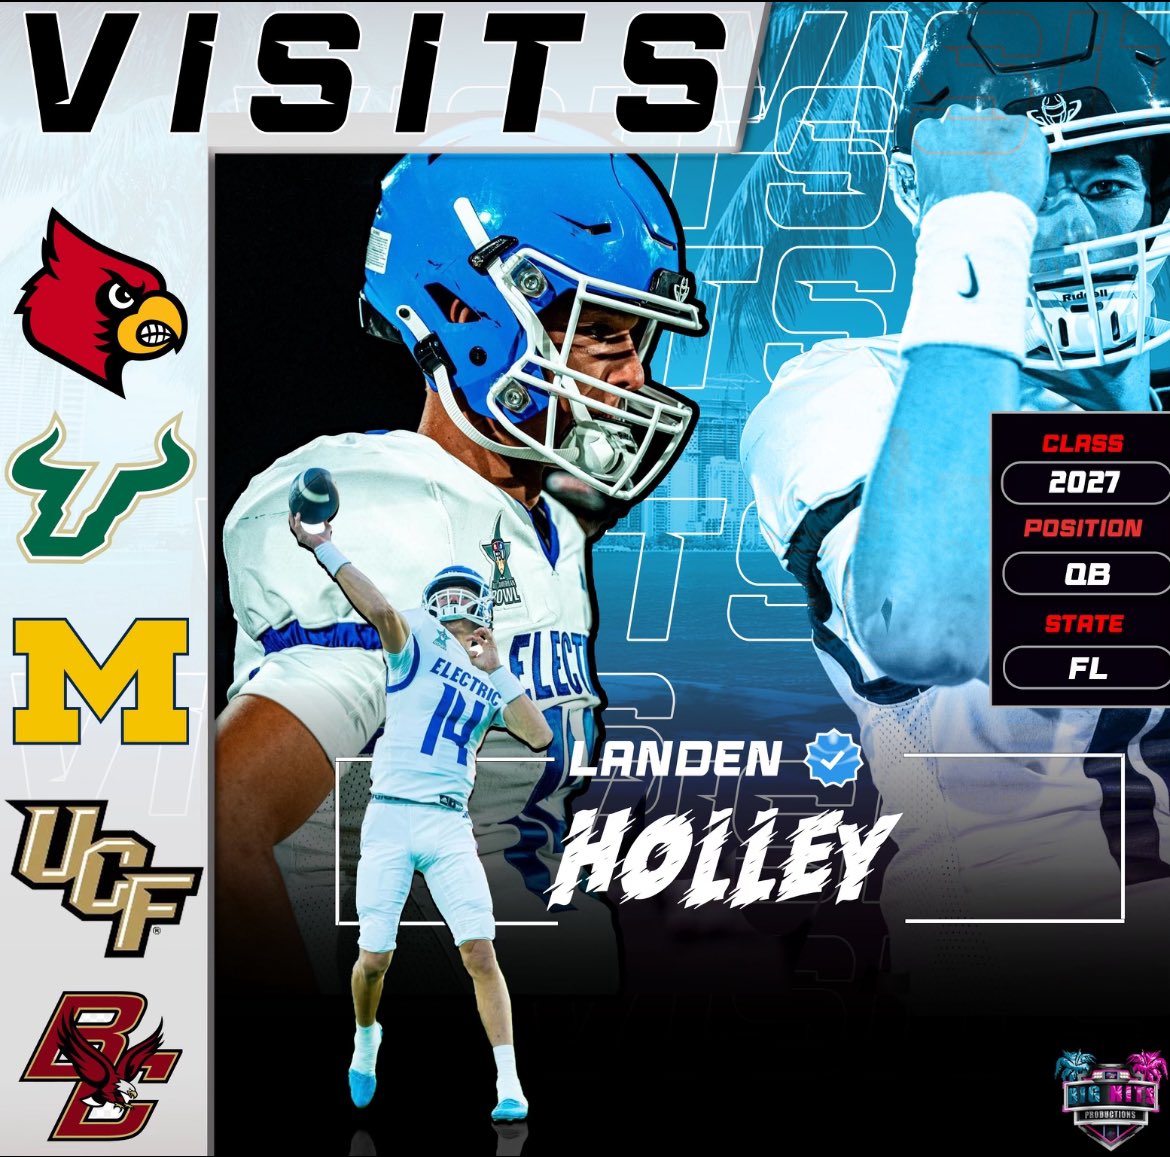 Thank you to all the coaches and schools that let me come visit and learn about their program/ edit creds @bighitslive/ @CoachPatterson_ @QBHitList